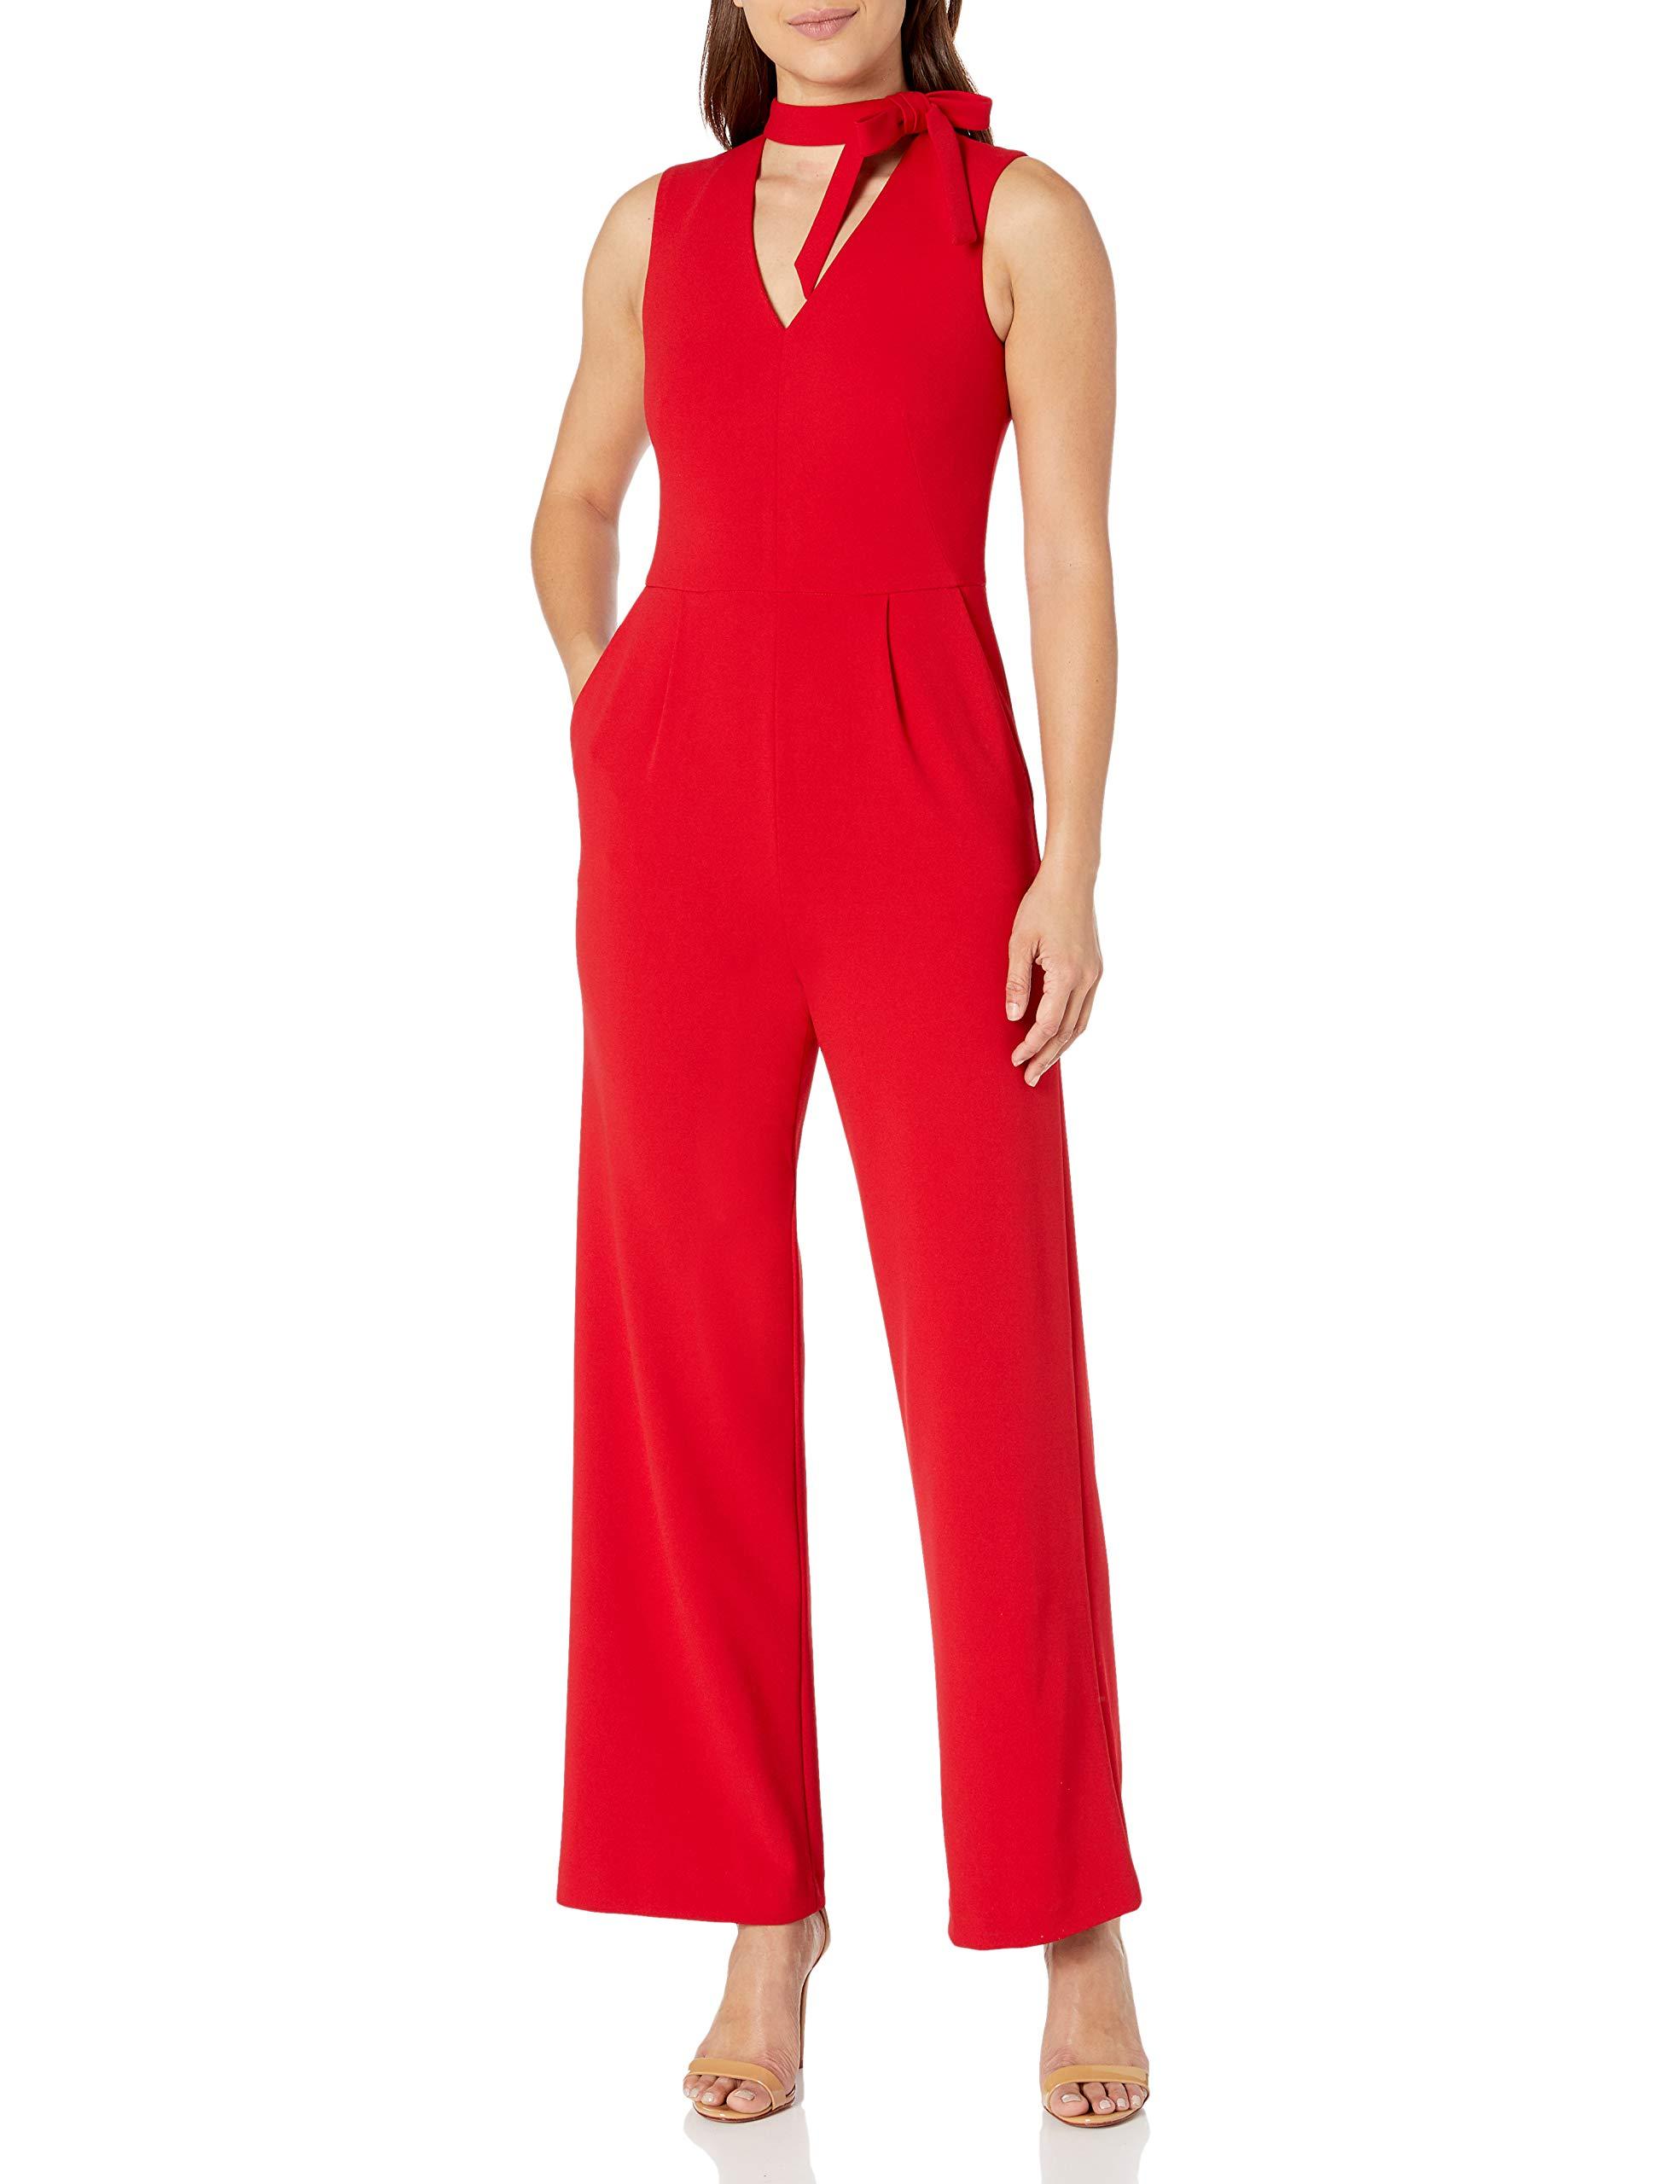 Calvin Klein Sleeveless Jumpsuit With Tie Neck in Red - Lyst